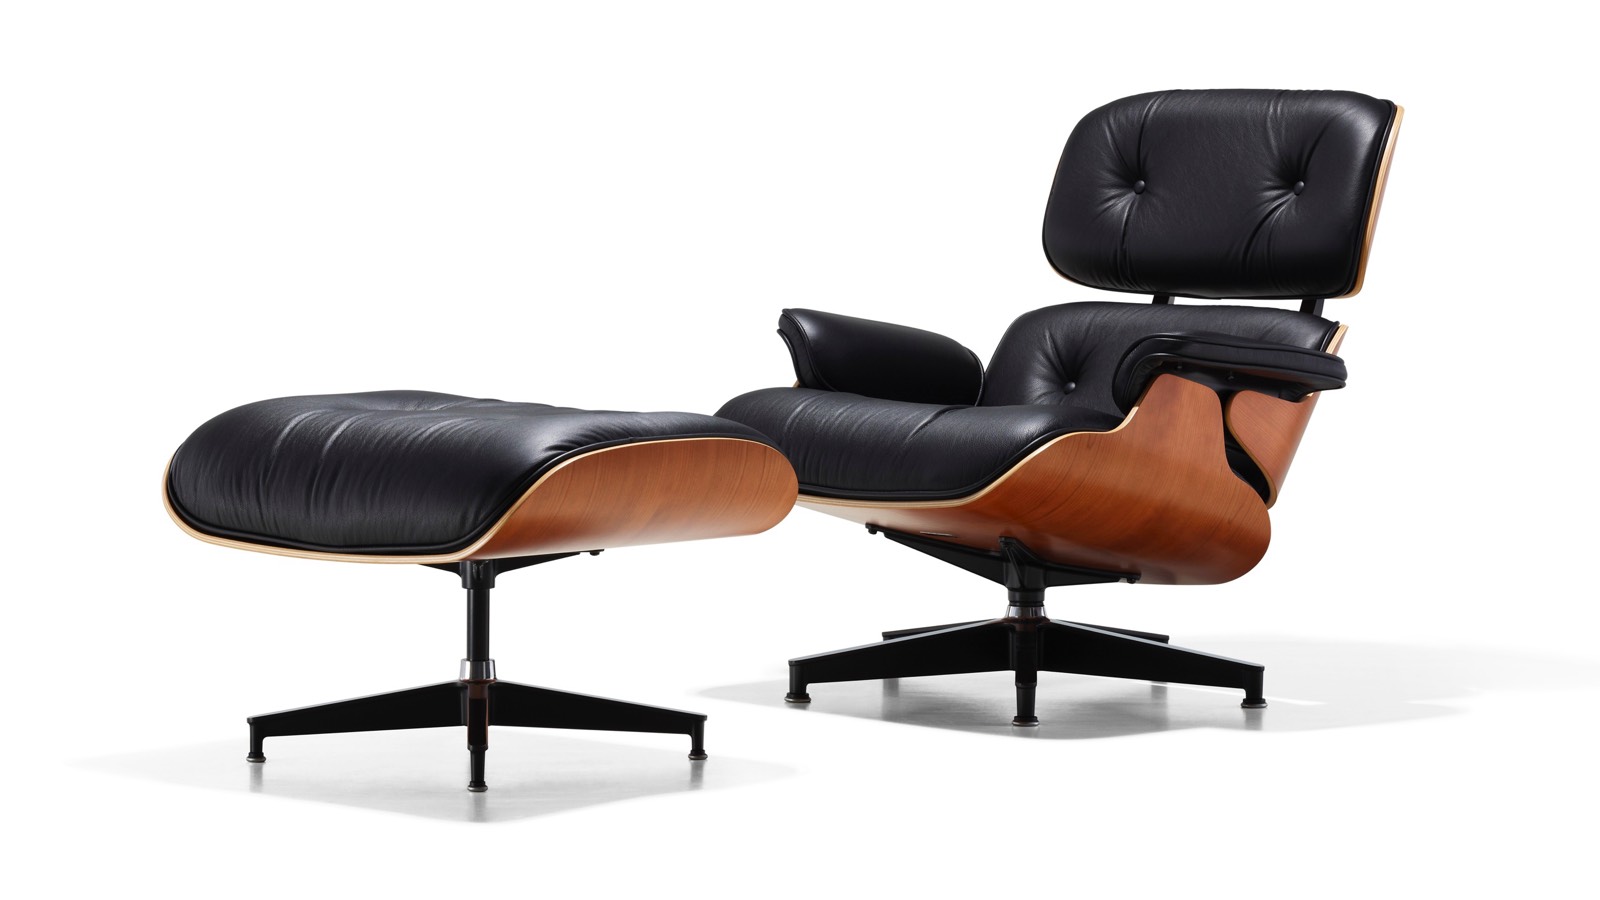 Eames Lounge and Ottoman Product Details - Lounge Chair - Herman 